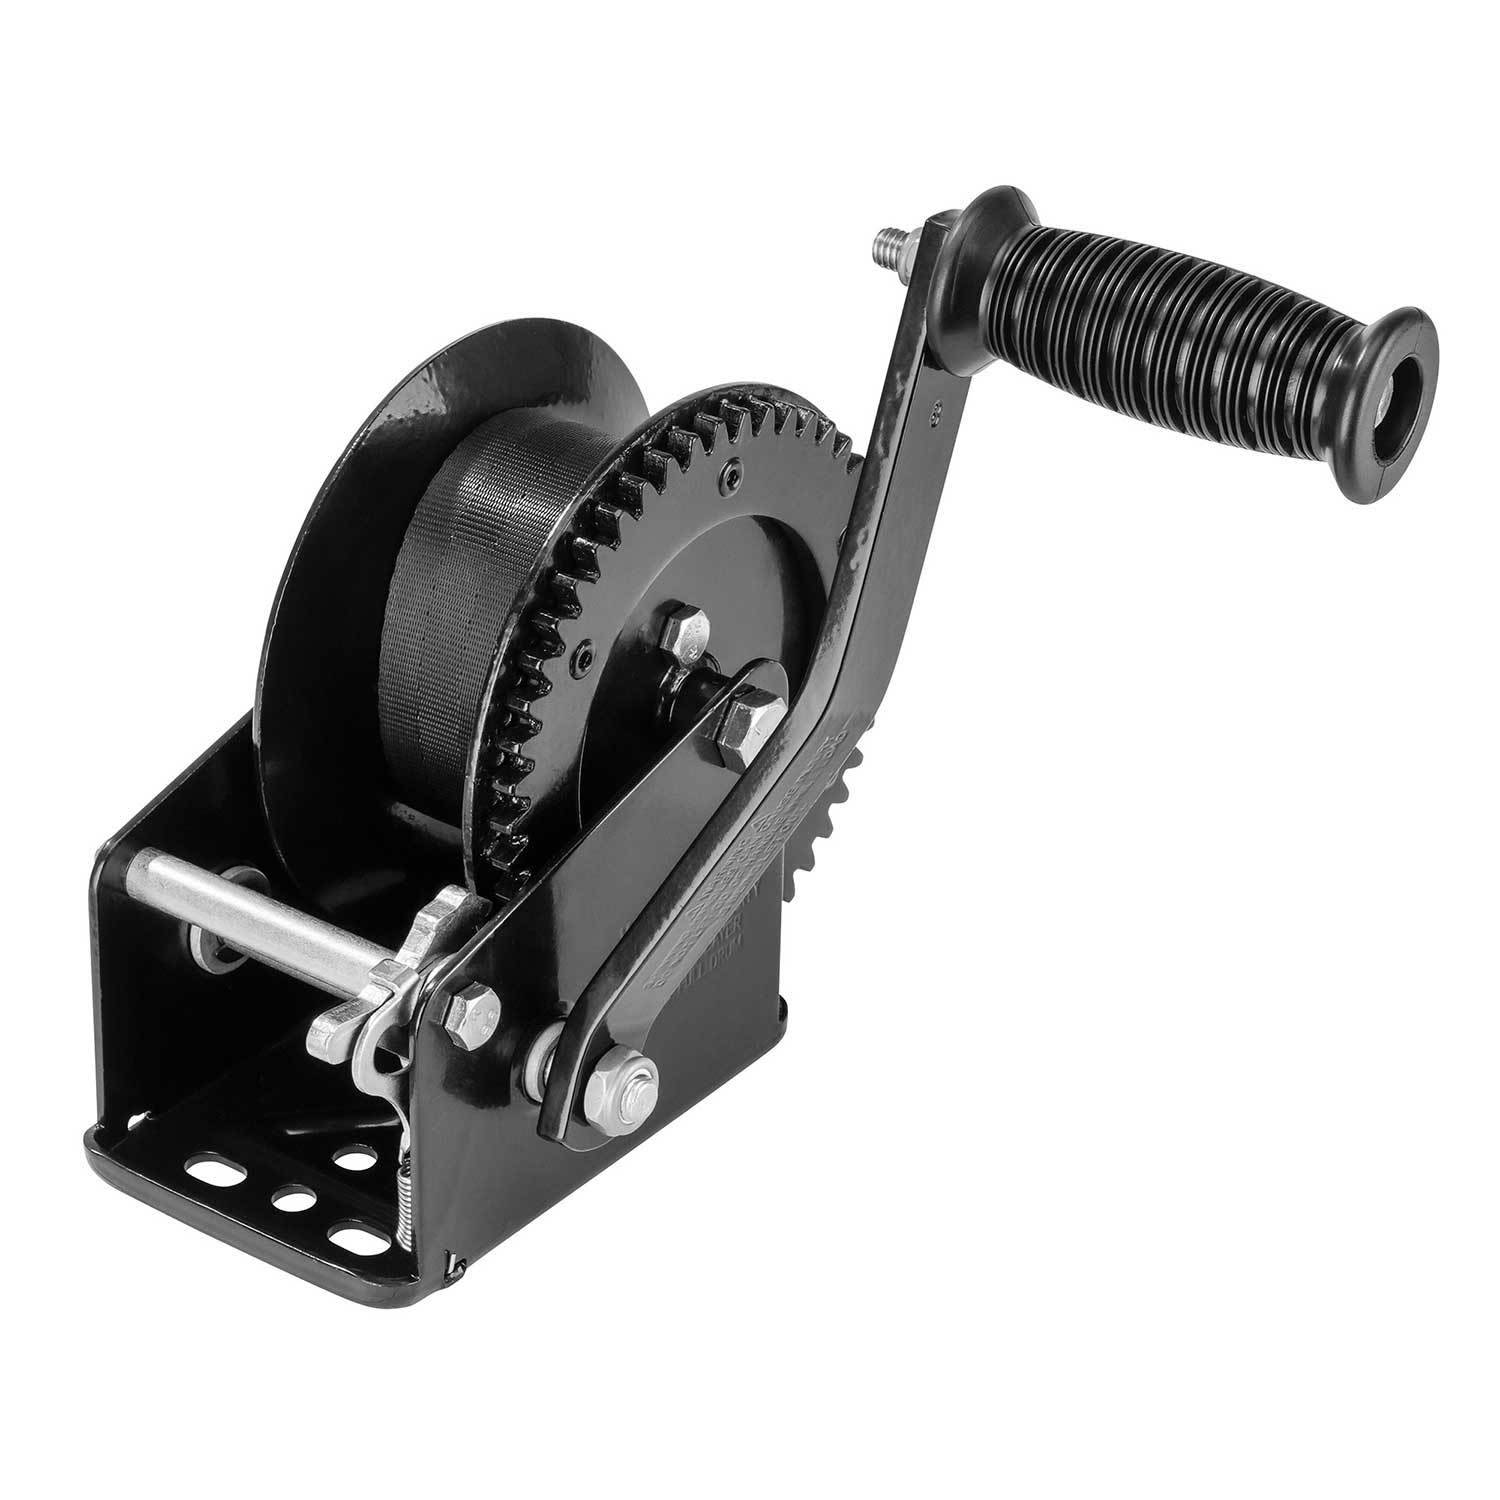 WEST MARINE 1800 lb. Manual Trailer Winch with Strap